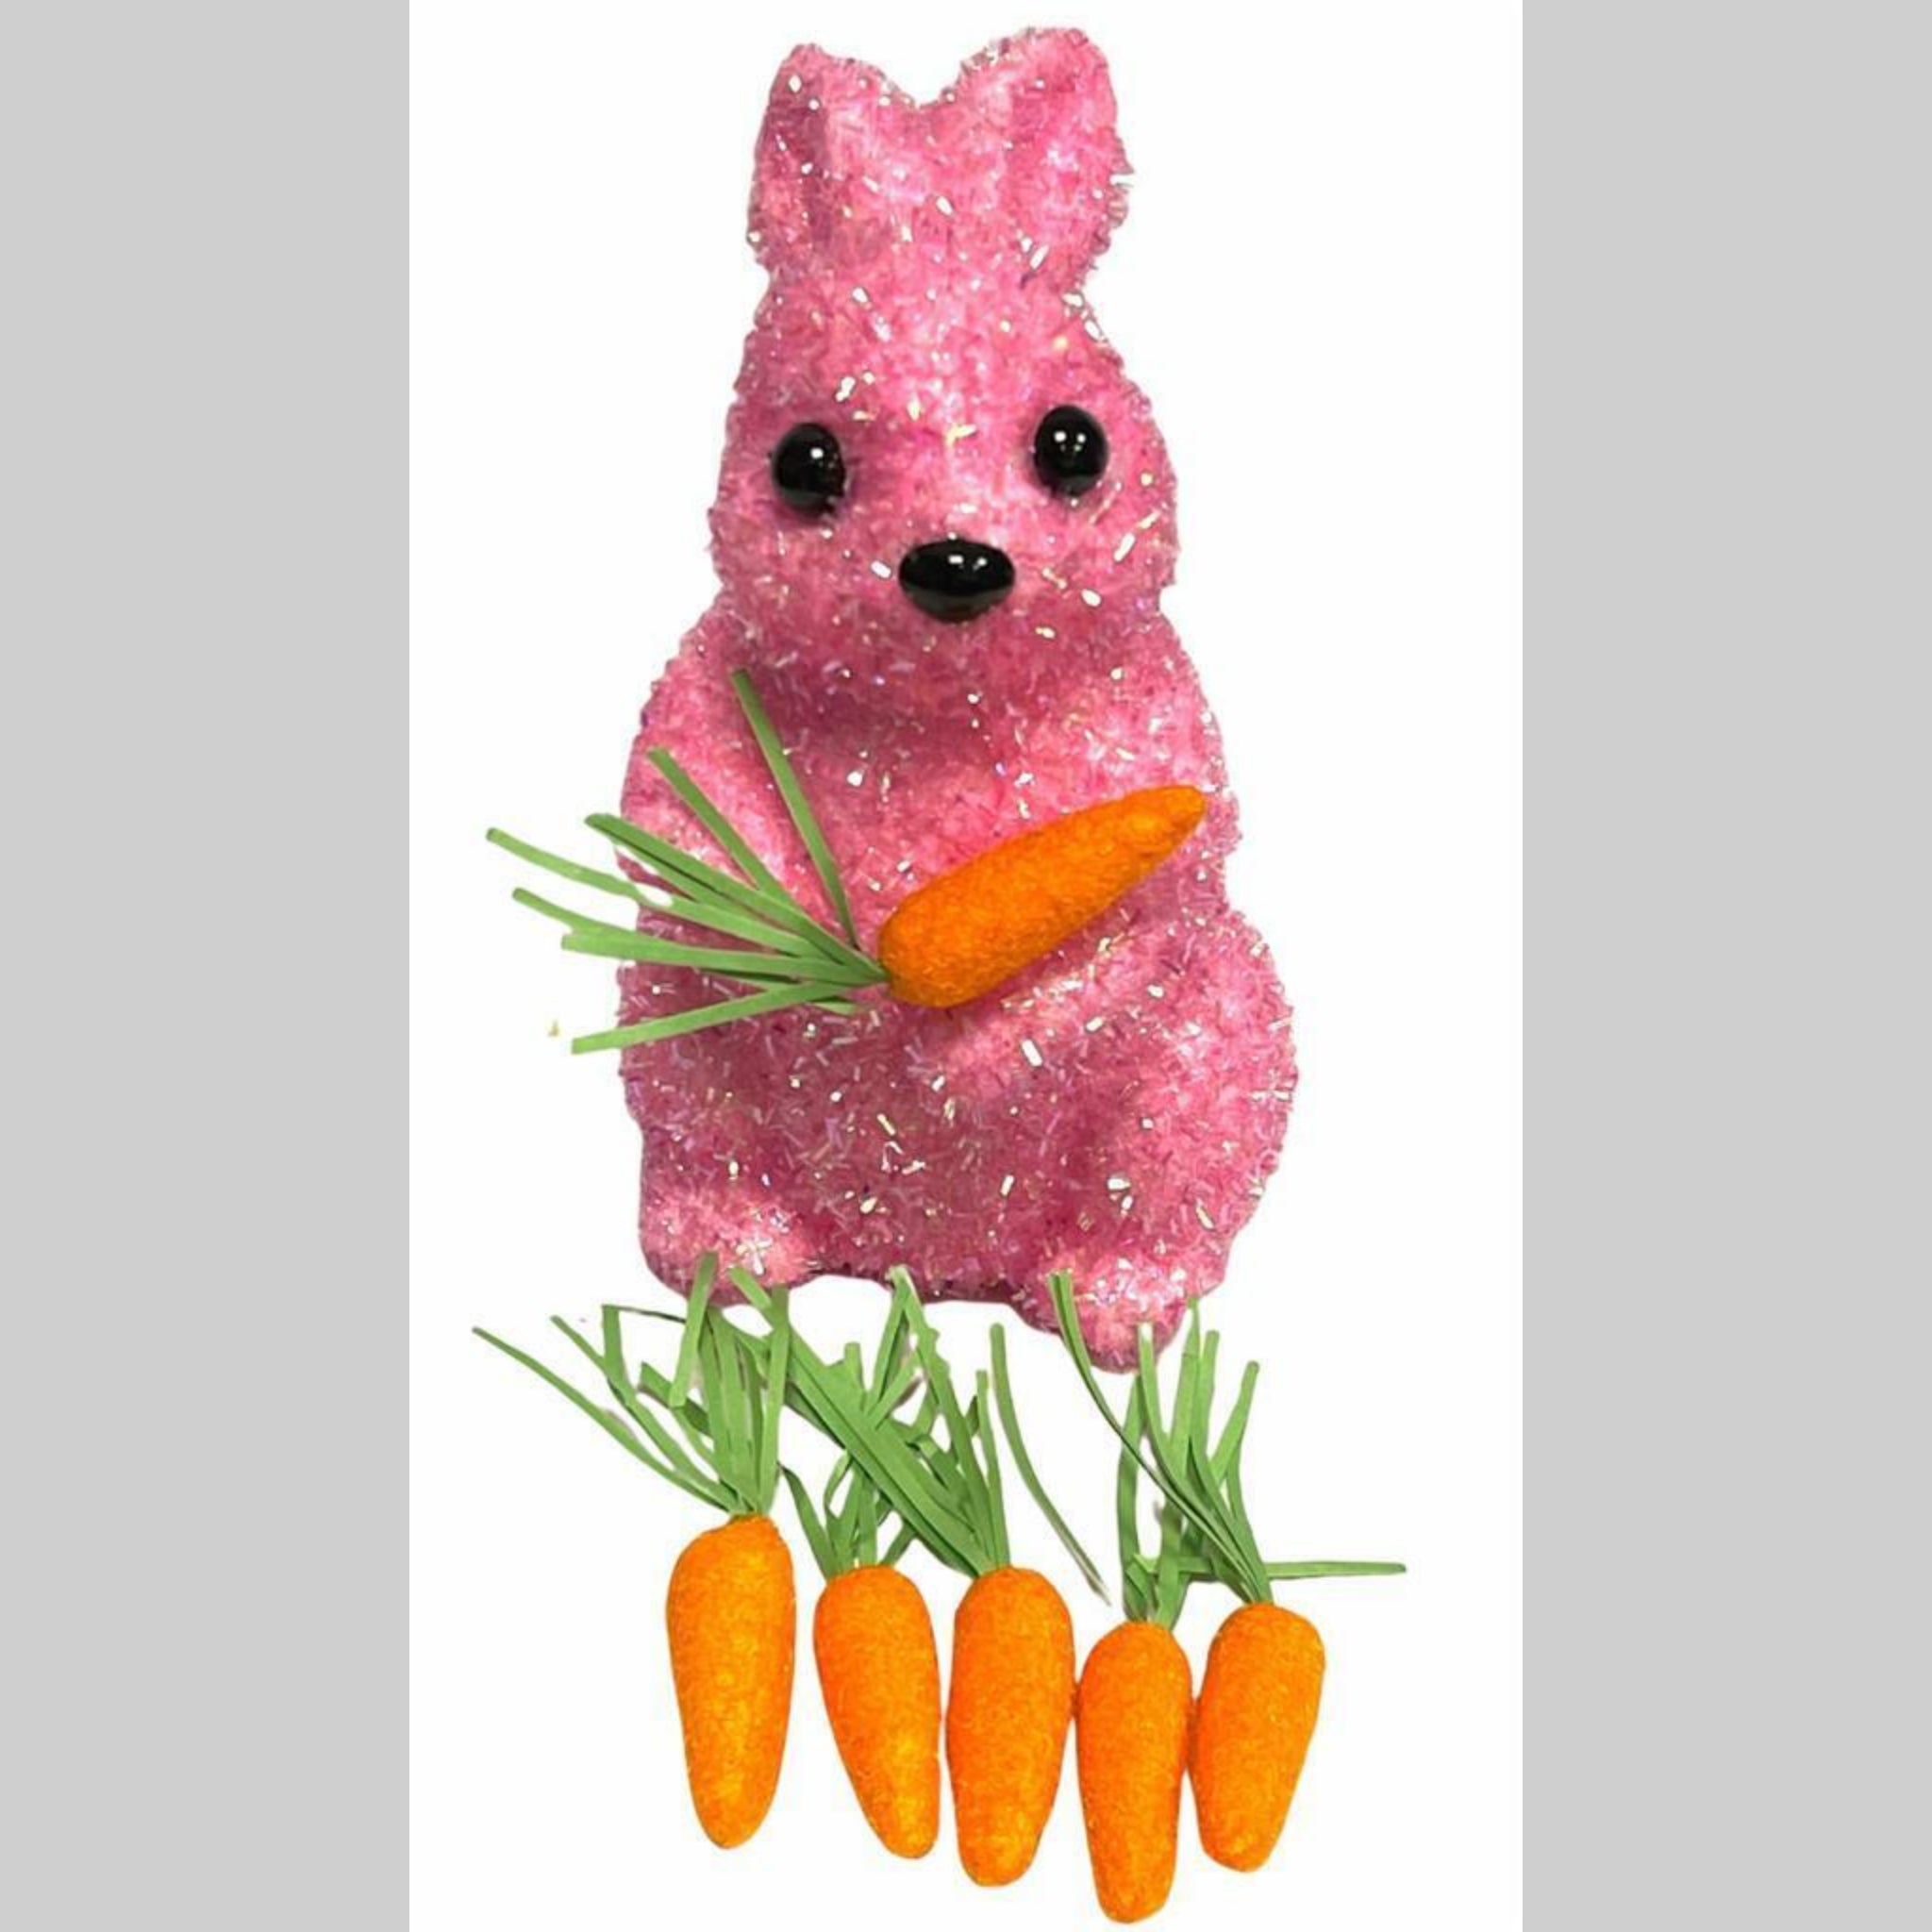 Beclen Harp 6" Easter Tinsel Shimmer/Glitter Bunny/Rabbit With Mini Carrot Party/Desk Decoration-Perfect For Easter Gift